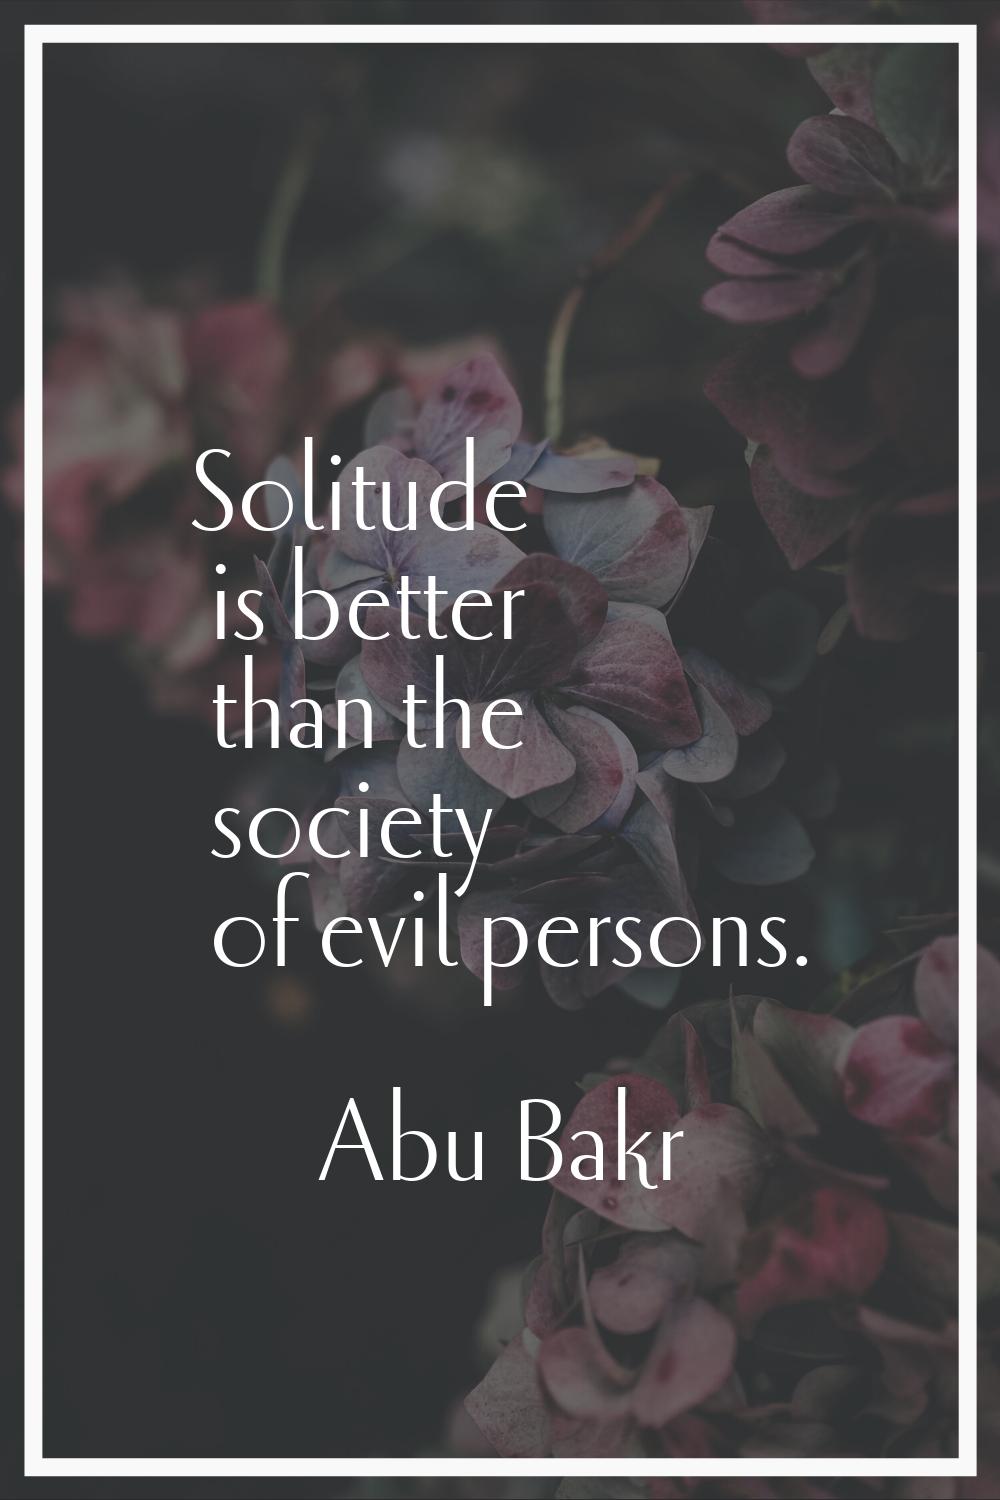 Solitude is better than the society of evil persons.